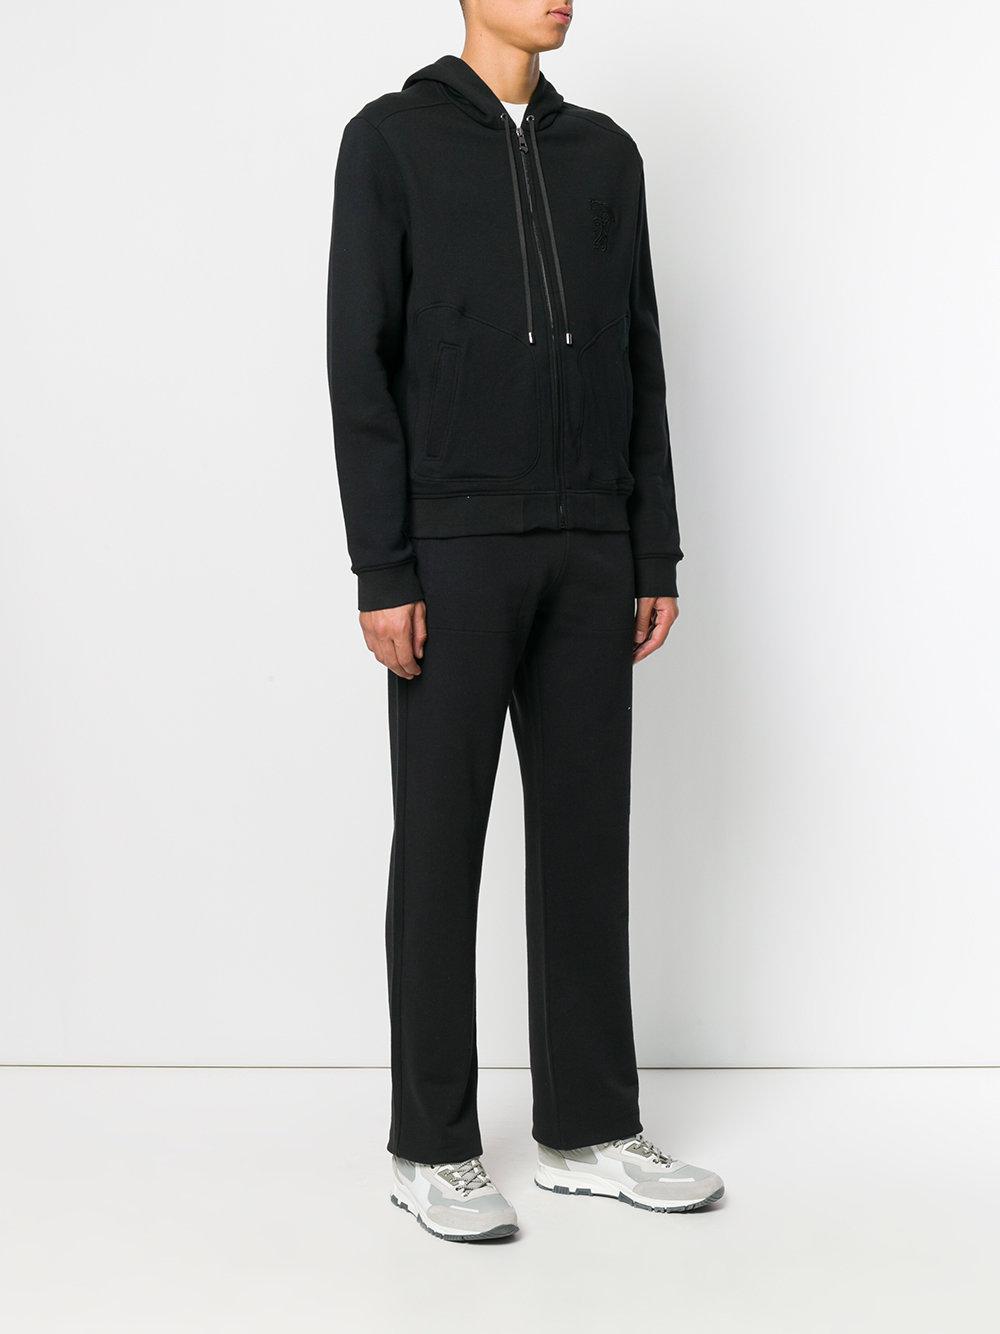 Versace Cotton Two-piece Tracksuit in Black for Men - Lyst